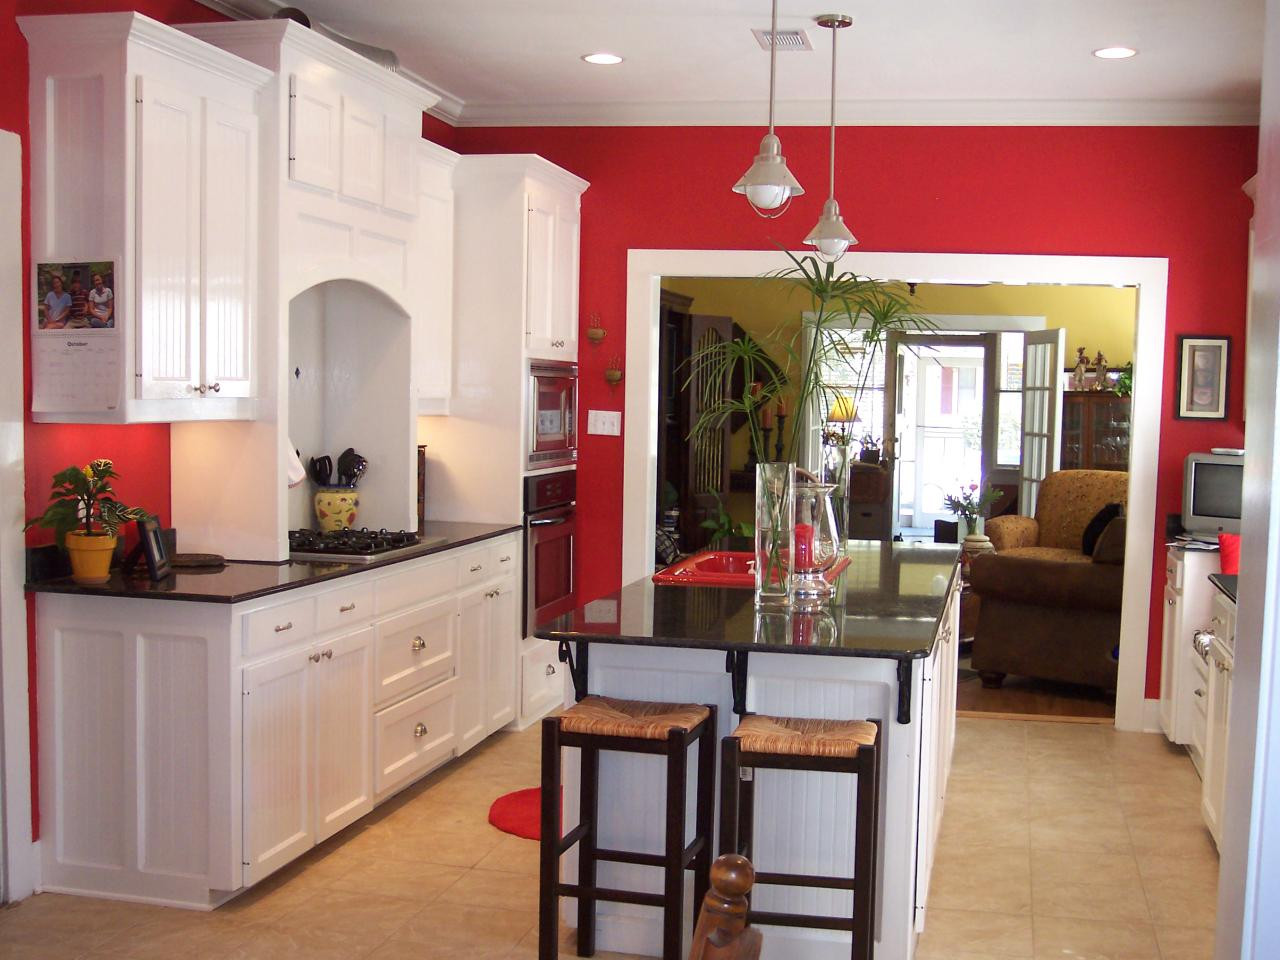 Wall Colors For Kitchen
 Kitchen Wall Colors with White Cabinets Home Furniture